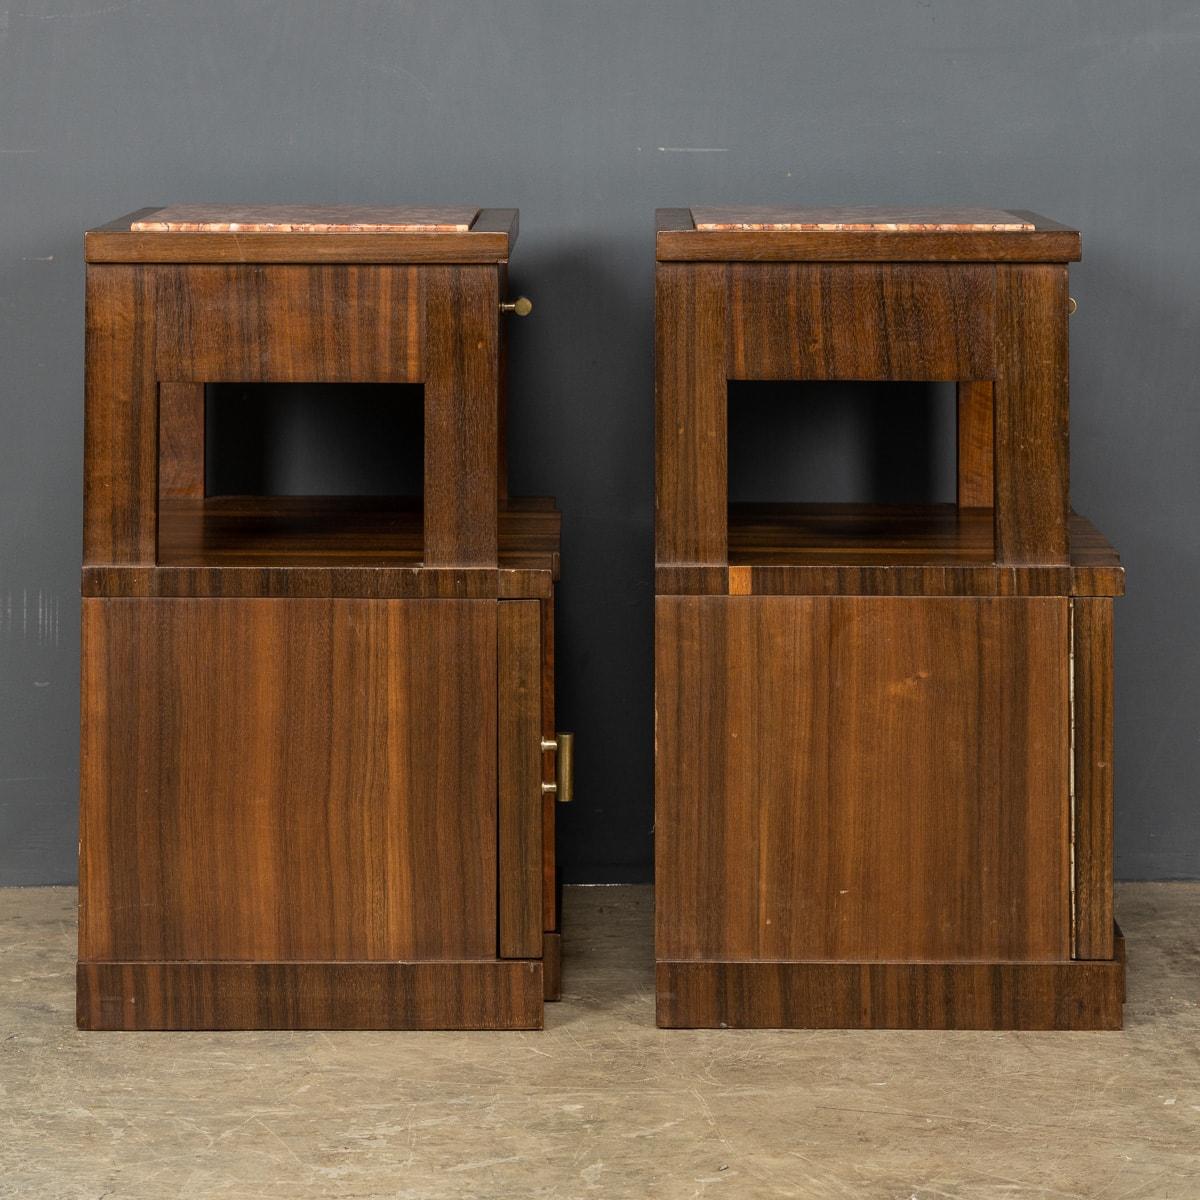 20th Century Italian Pair of Kingwood & Marble Bedside Cabinets, C.1950 For Sale 4